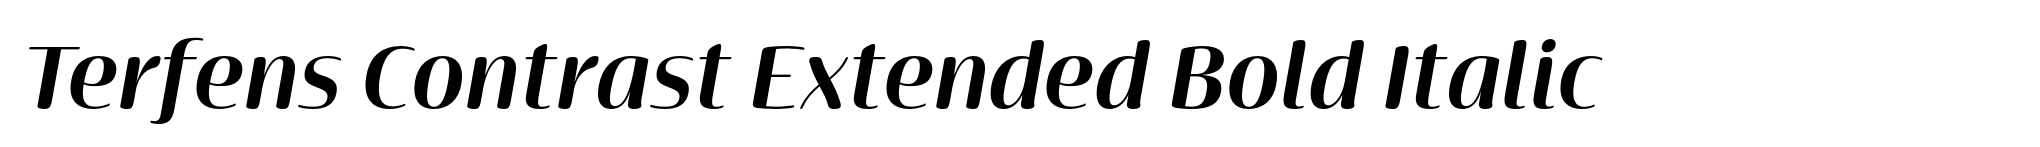 Terfens Contrast Extended Bold Italic image